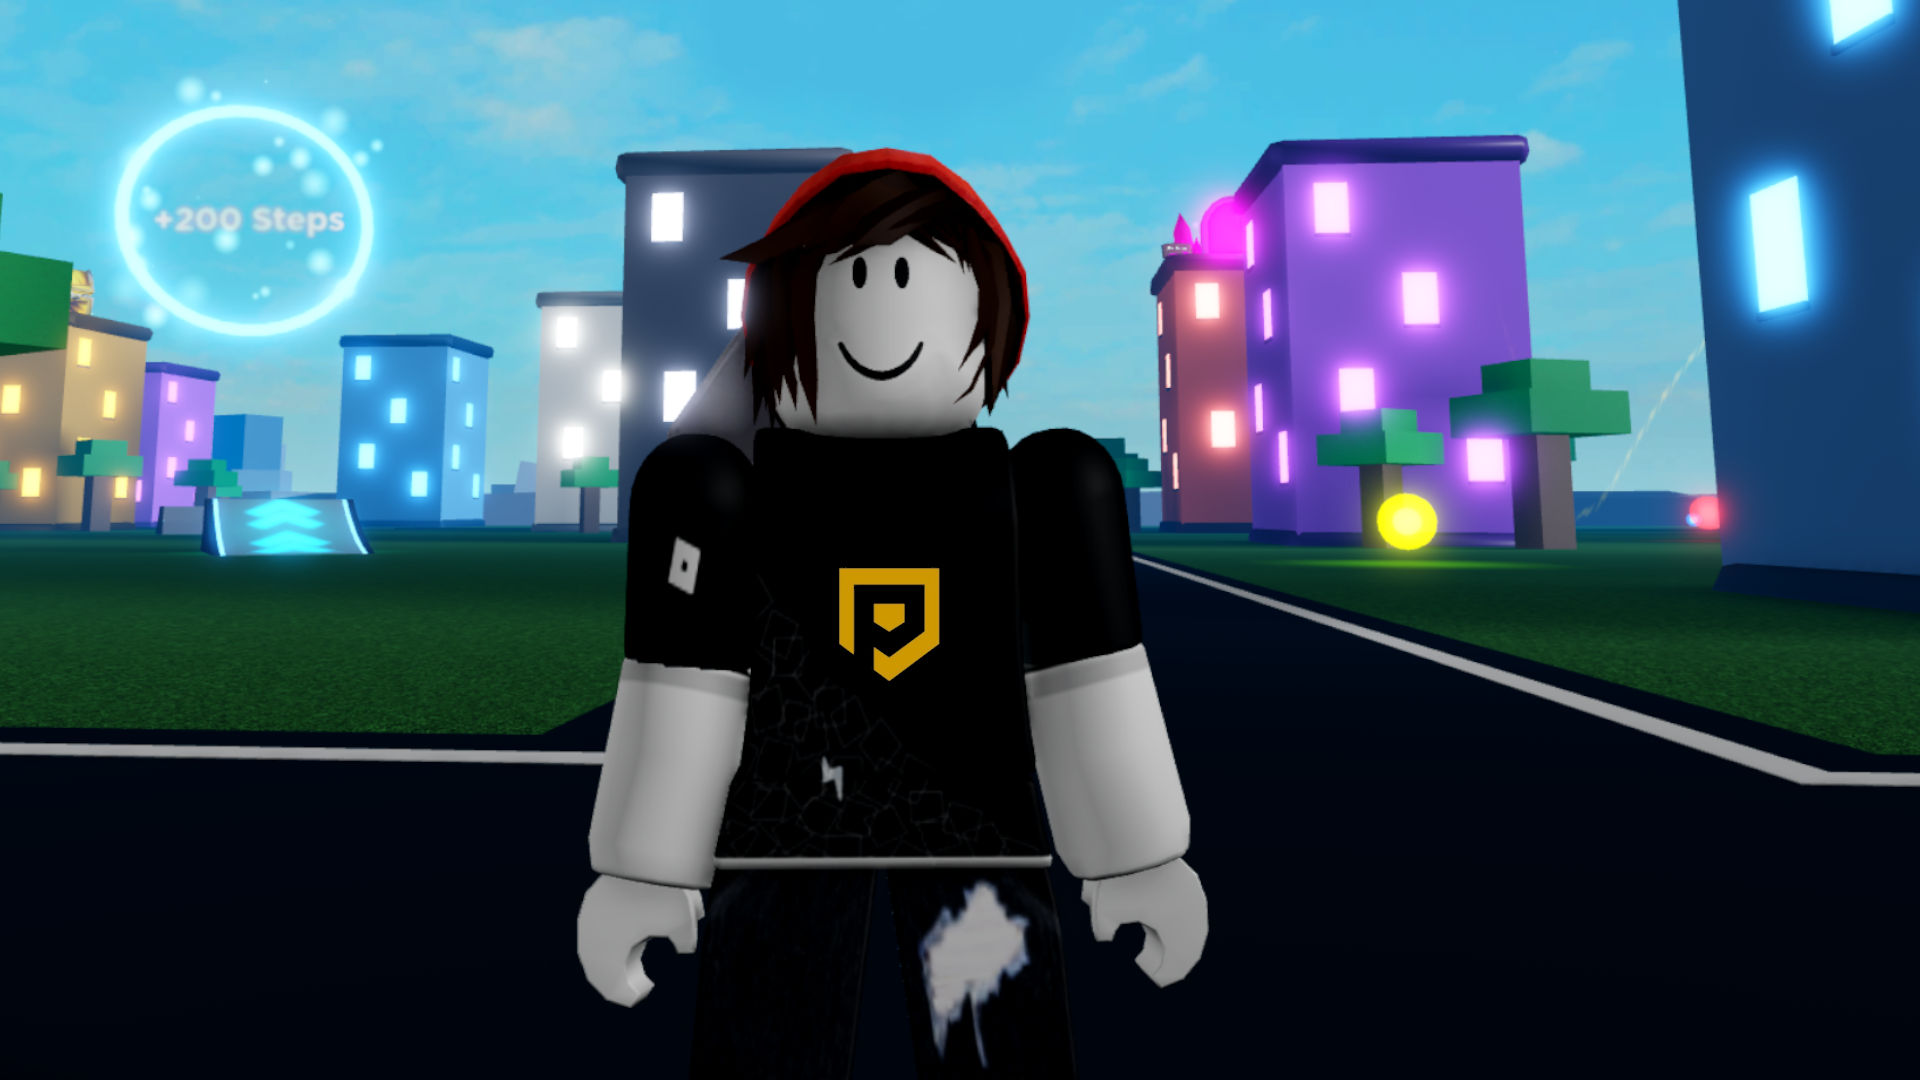 Cool pictures in roblox - Google Search